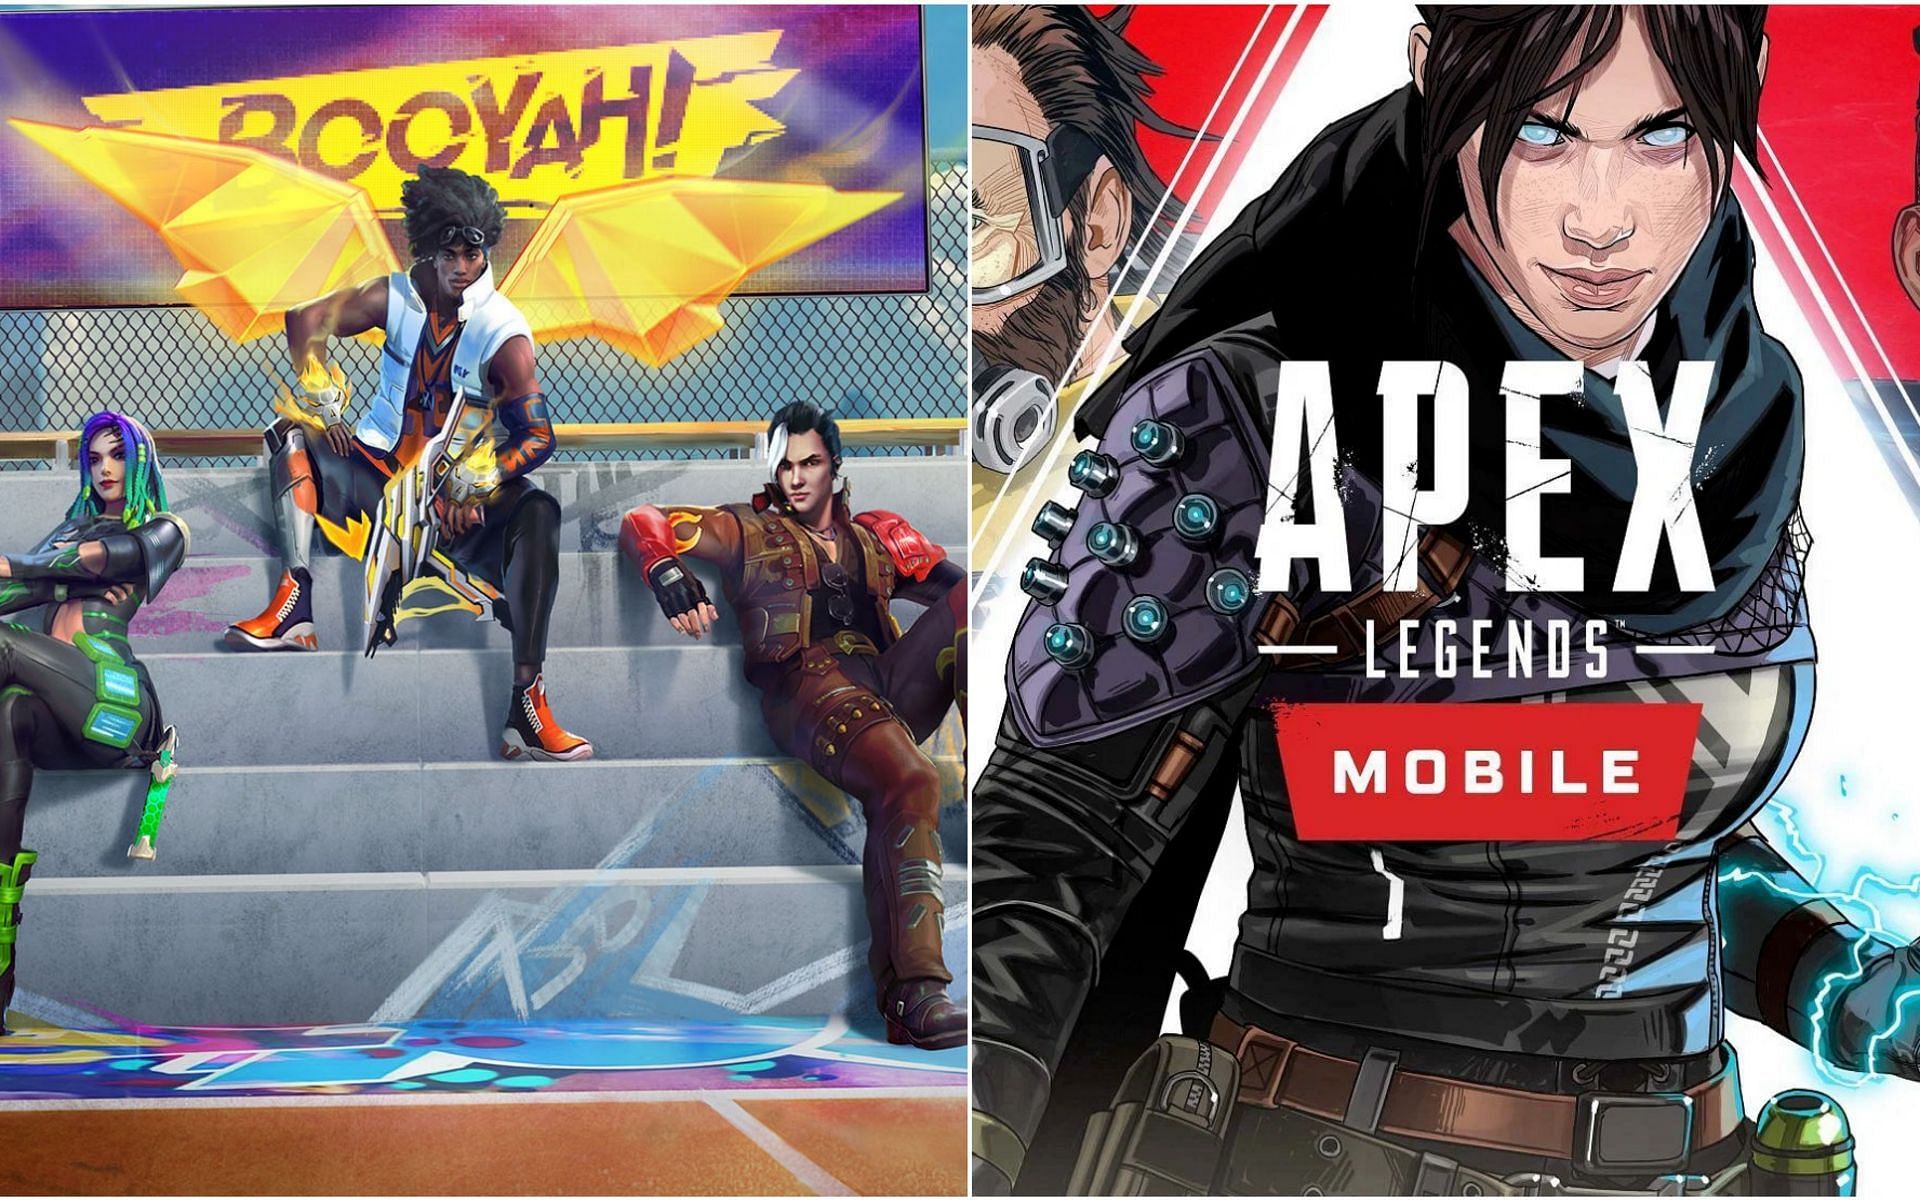 Apex Legends Mobile' To Launch in 10 Countries Next Week